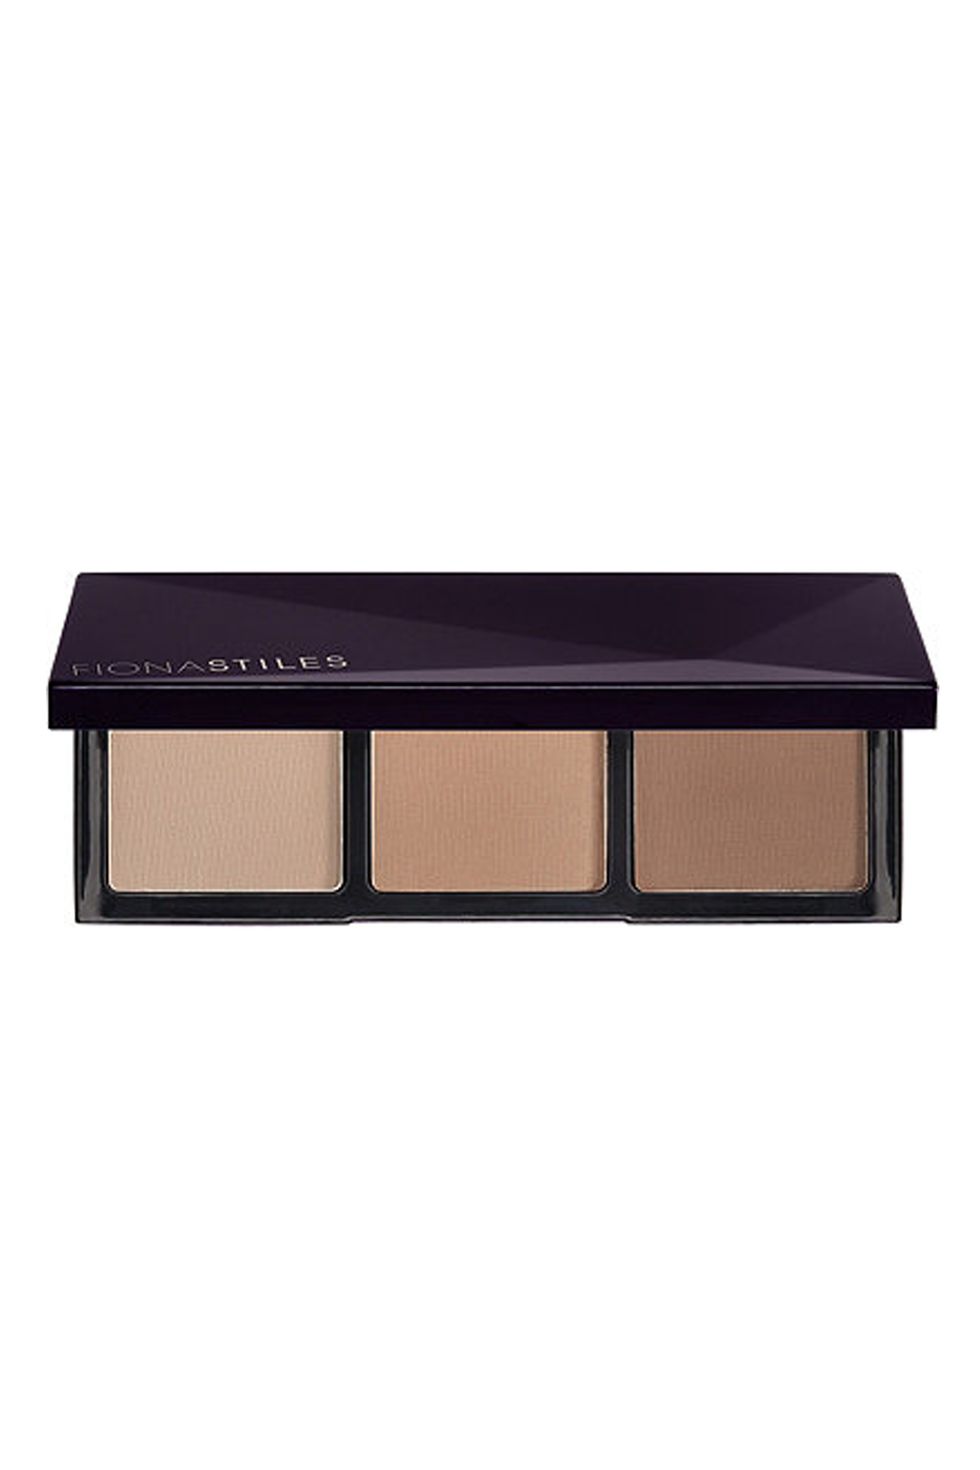 <p>When celebrity makeup artist Fiona Stiles couldn't find the perfect contour palette, she created her own. "I made the Fiona Stiles Sheer Sculpting Palette because I found most contours to be too opaque, making it look less believable," she says.&nbsp;"What I love about this one is that it gives real depth and come in two different tones, light/medium and medium/dark."</p><p>Fiona Stiles Sheer Sculpting Palette, $28, <u data-redactor-tag="u"><a href="http://fionastilesbeauty.com/face/products/18/sheer-sculpting-palette">Fionastilesbeauty.com</a></u></p>